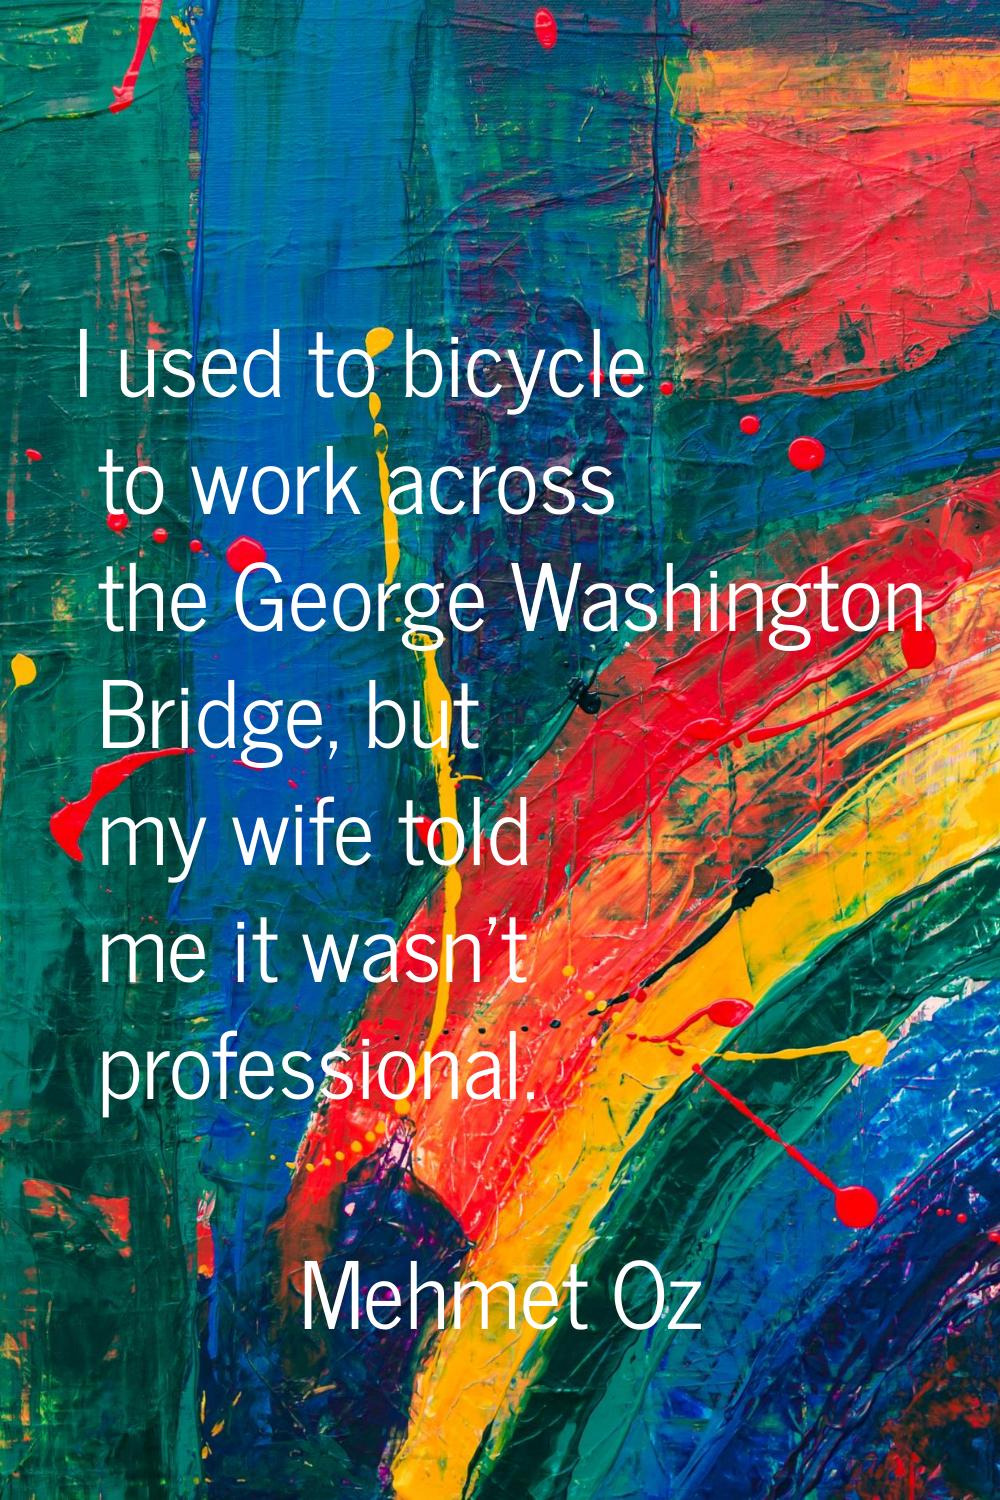 I used to bicycle to work across the George Washington Bridge, but my wife told me it wasn't profes